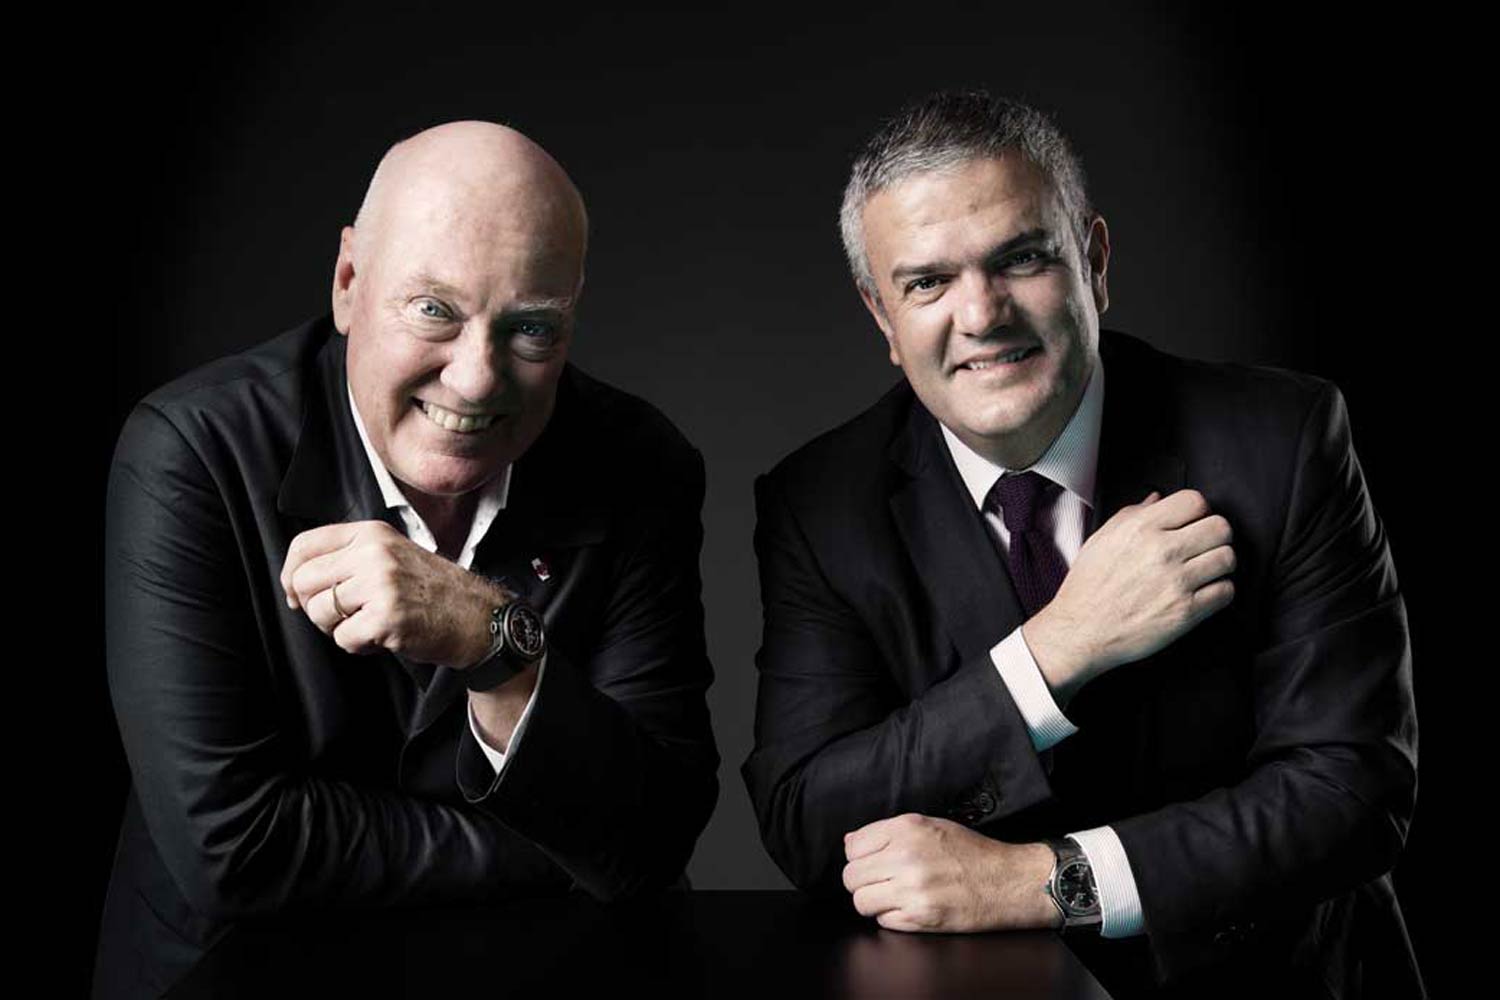 (From left) The charismatic Jean-Claude Biver and Ricardo Guadalupe, CEO of Hublot.